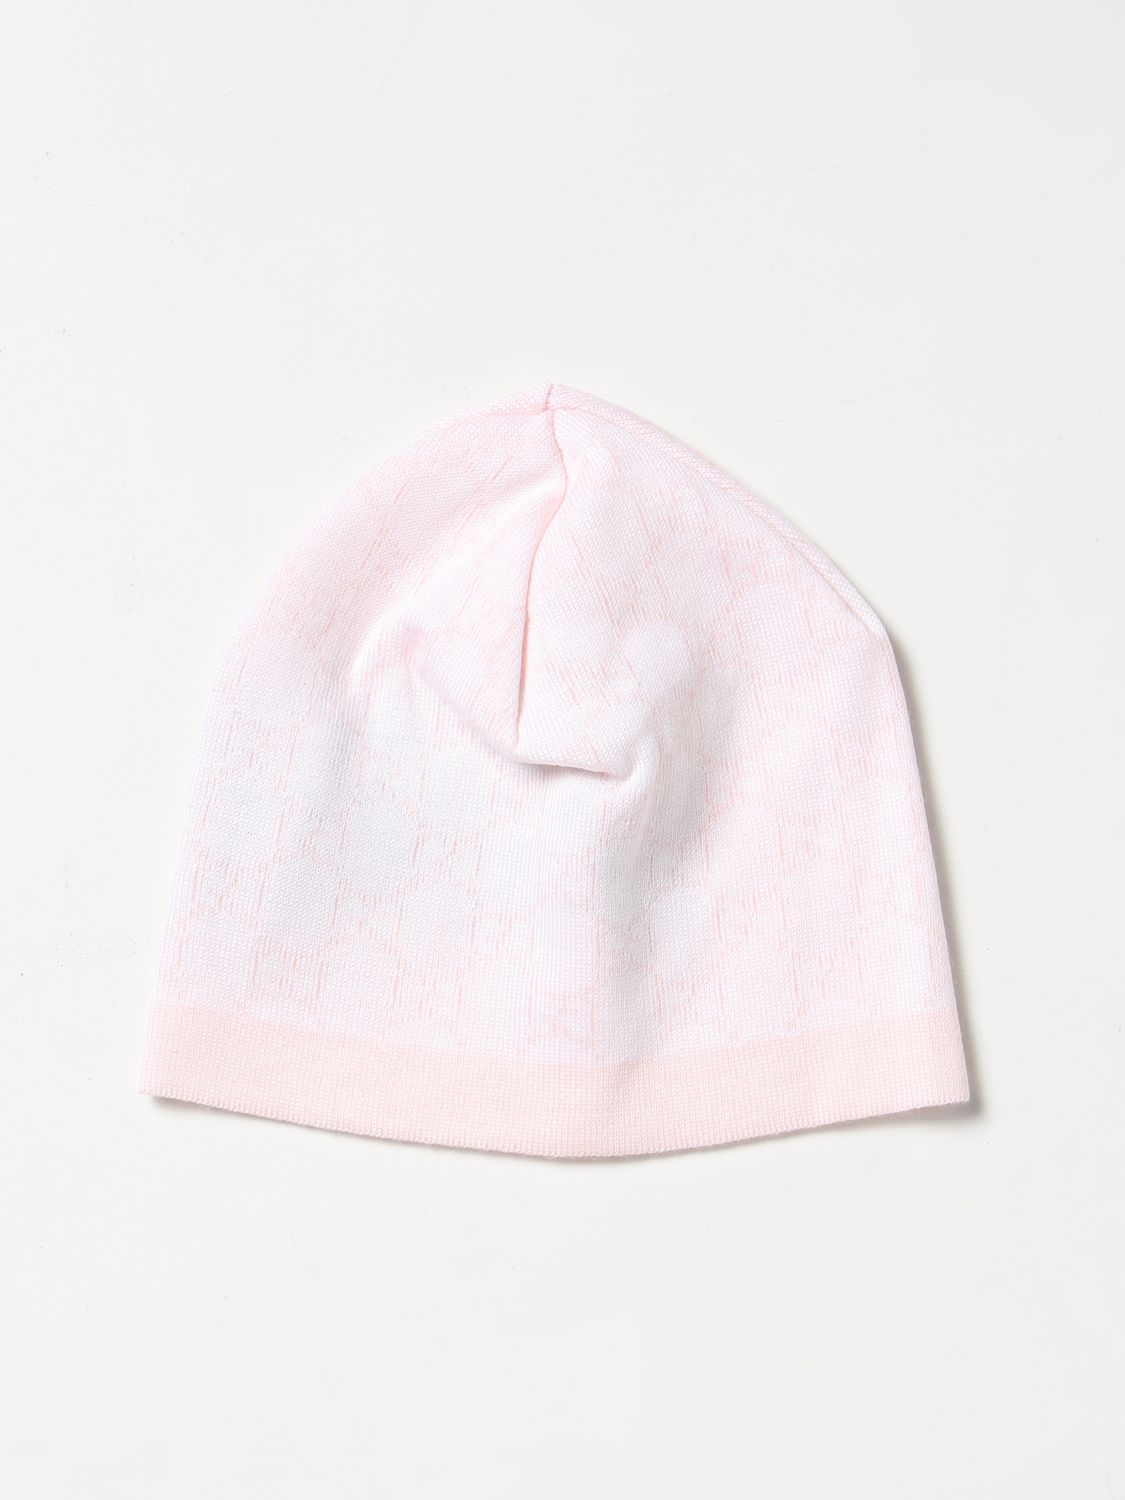 GUCCI: wool hat with jacquard GG monogram - Pink | Gucci hat 4185993K206  online on 